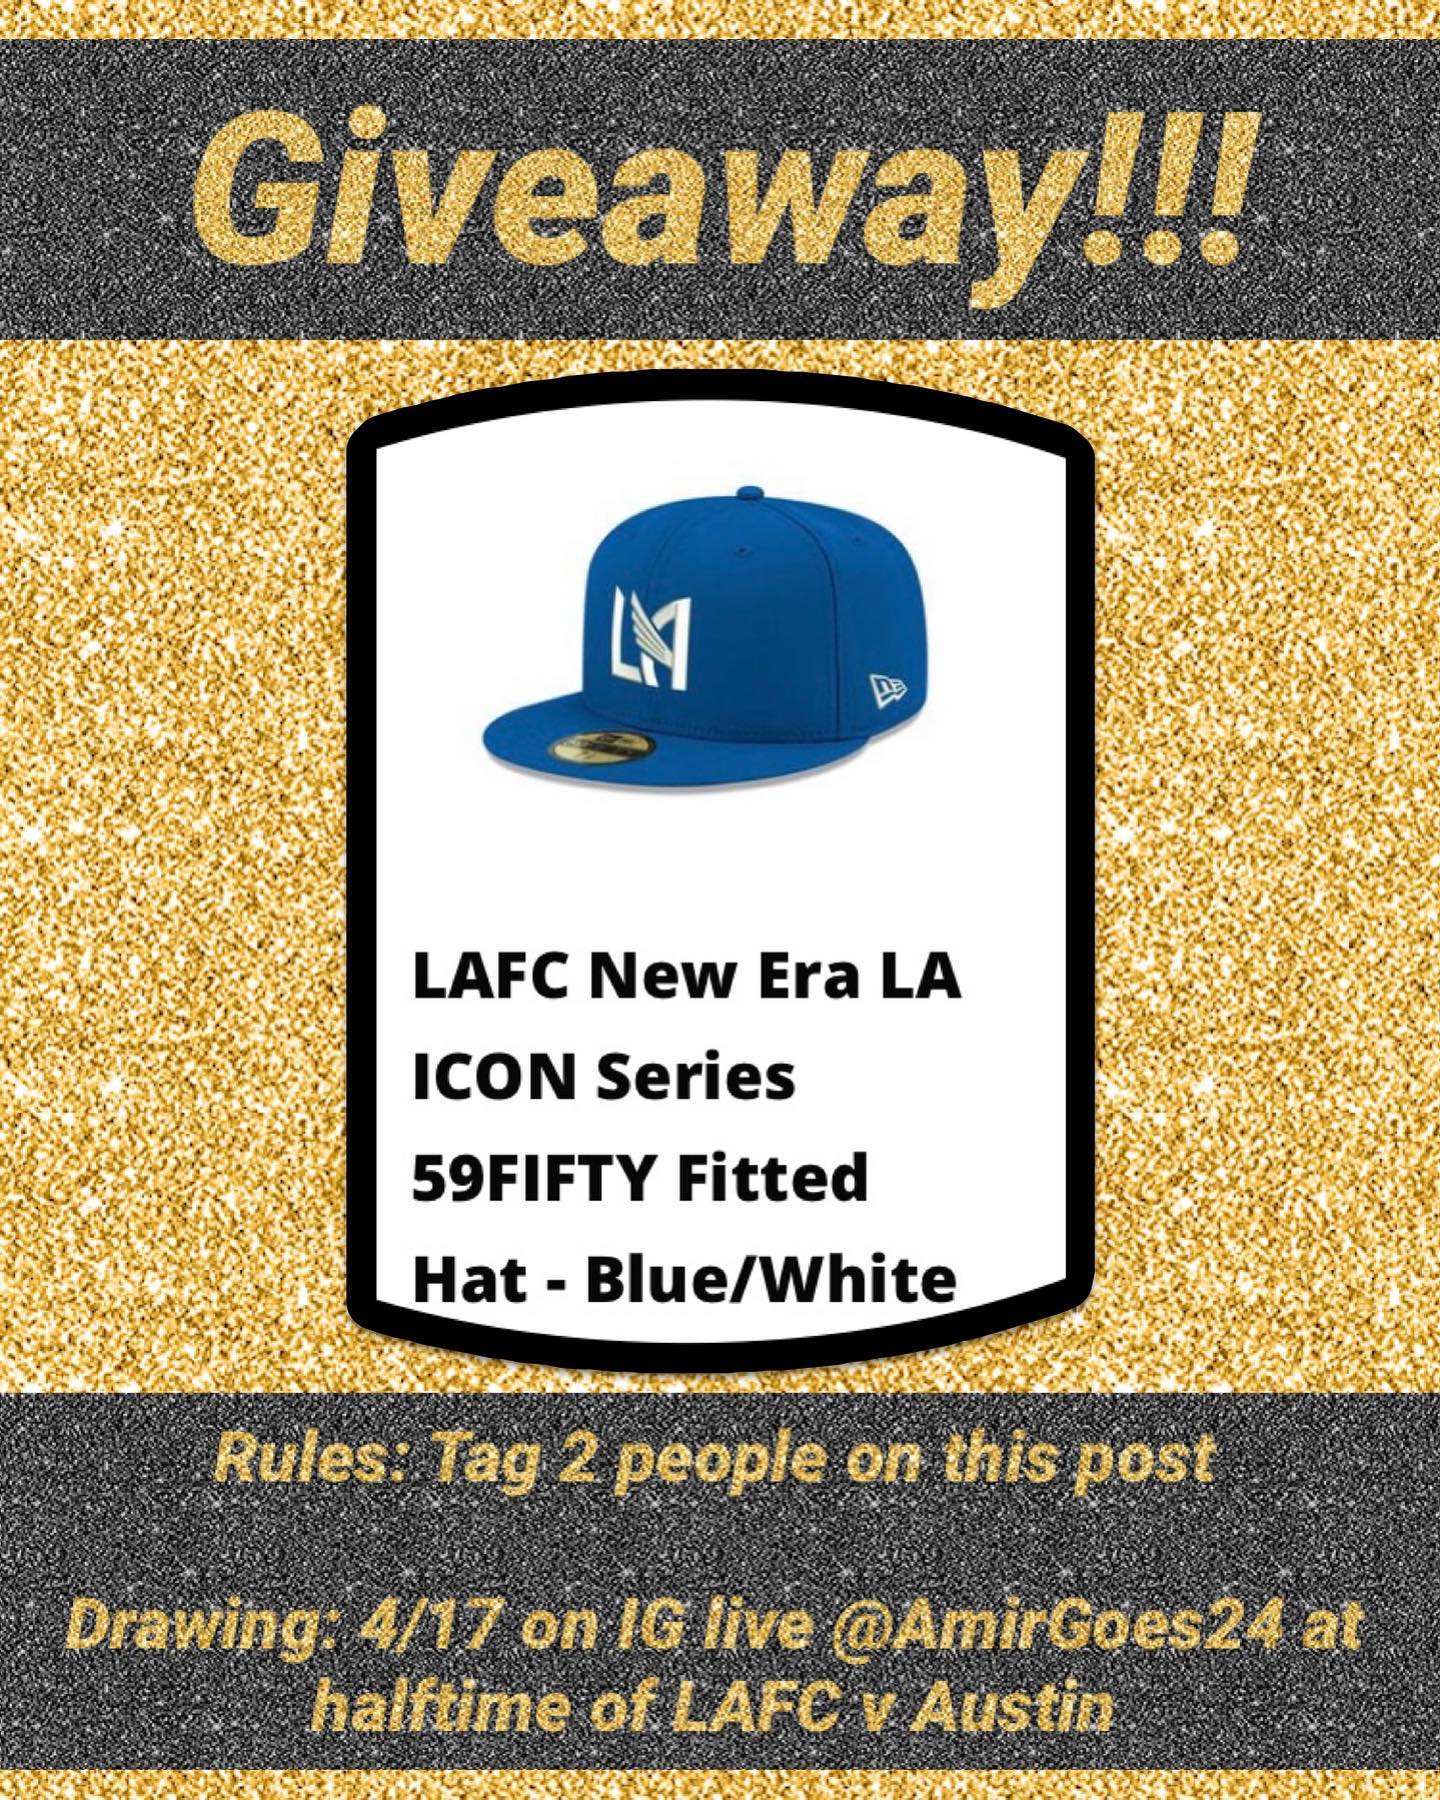 Let’s celebrate the good times not the Bad, Season 4 here we go!! As far as I know we undefeated as of right now haha! UNLIMITED ENTRIES! Tag away! I’ve grown to love this hat so I hope you do to!! Drawing will be on IG live at halftime of LAFC v Austin, on 4/17! Game starts at 3:00pm! You do the math lol! ⁣
.⁣
.⁣
.⁣
.⁣
.⁣
#losangelesfootballclub️